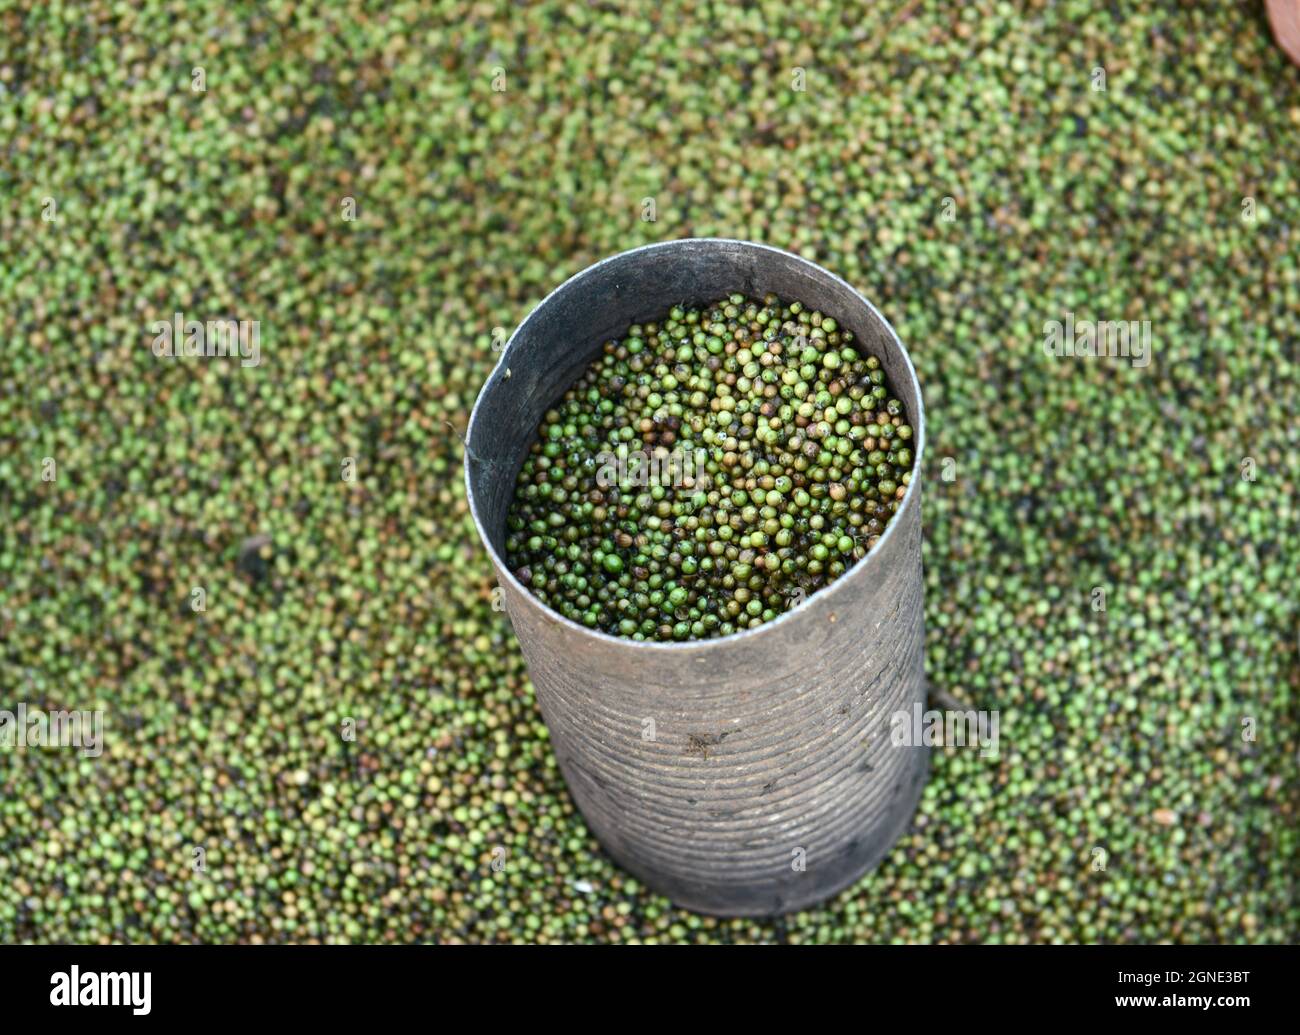 Mung beans sold at the colorful outdoor weekly market in Bati, Ethiopia. Stock Photo